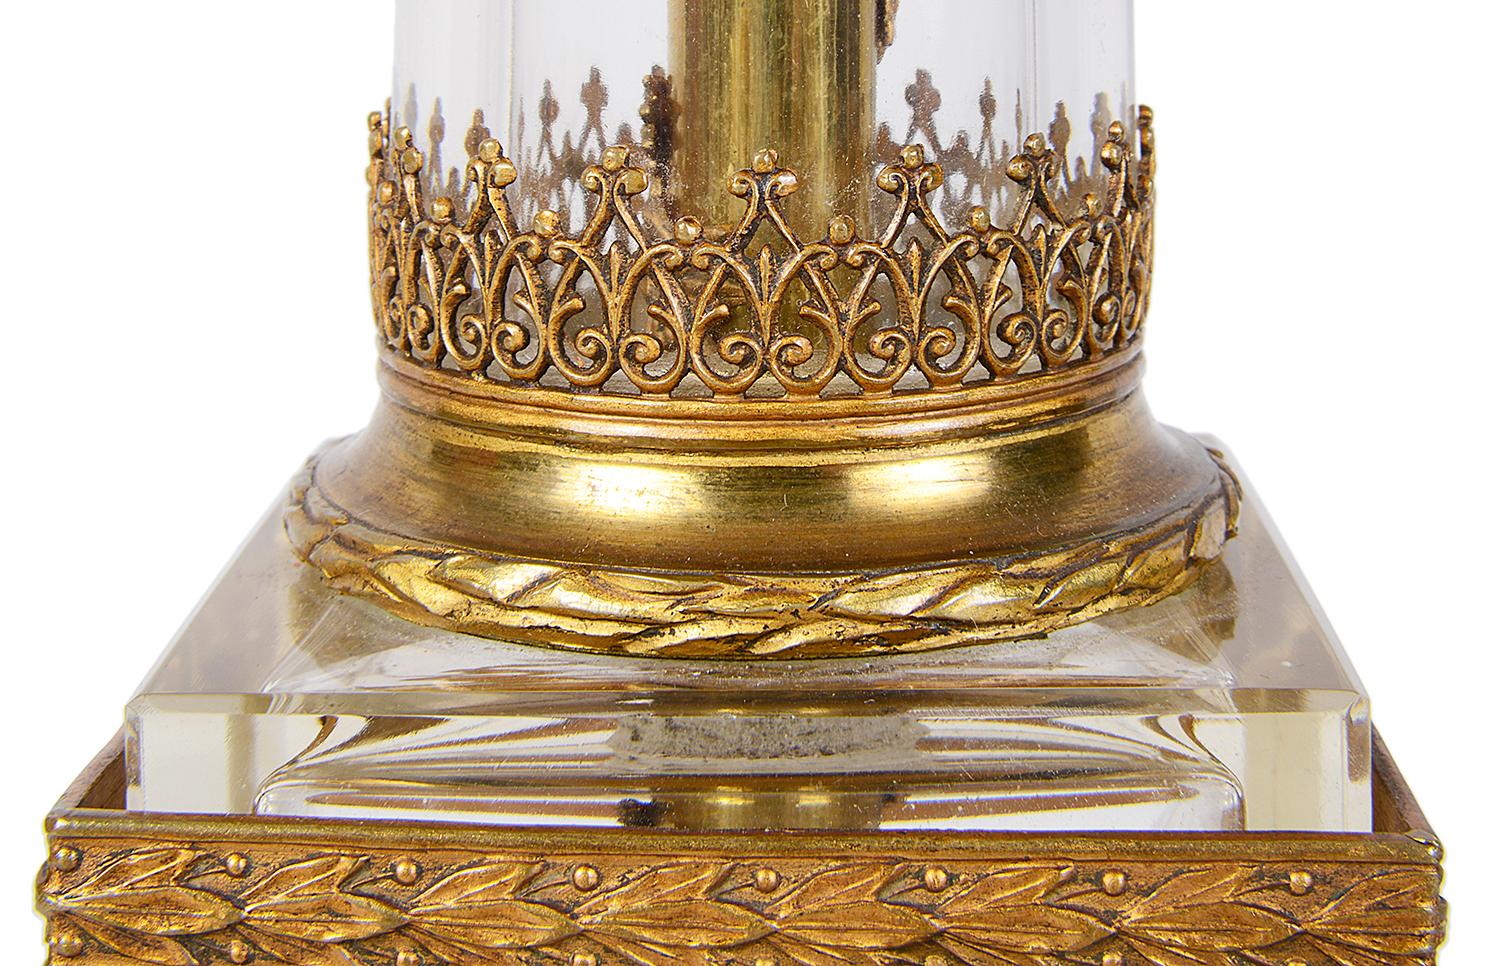 20th Century Classical French Empire Style Glass and Ormolu Lamp, circa 1900